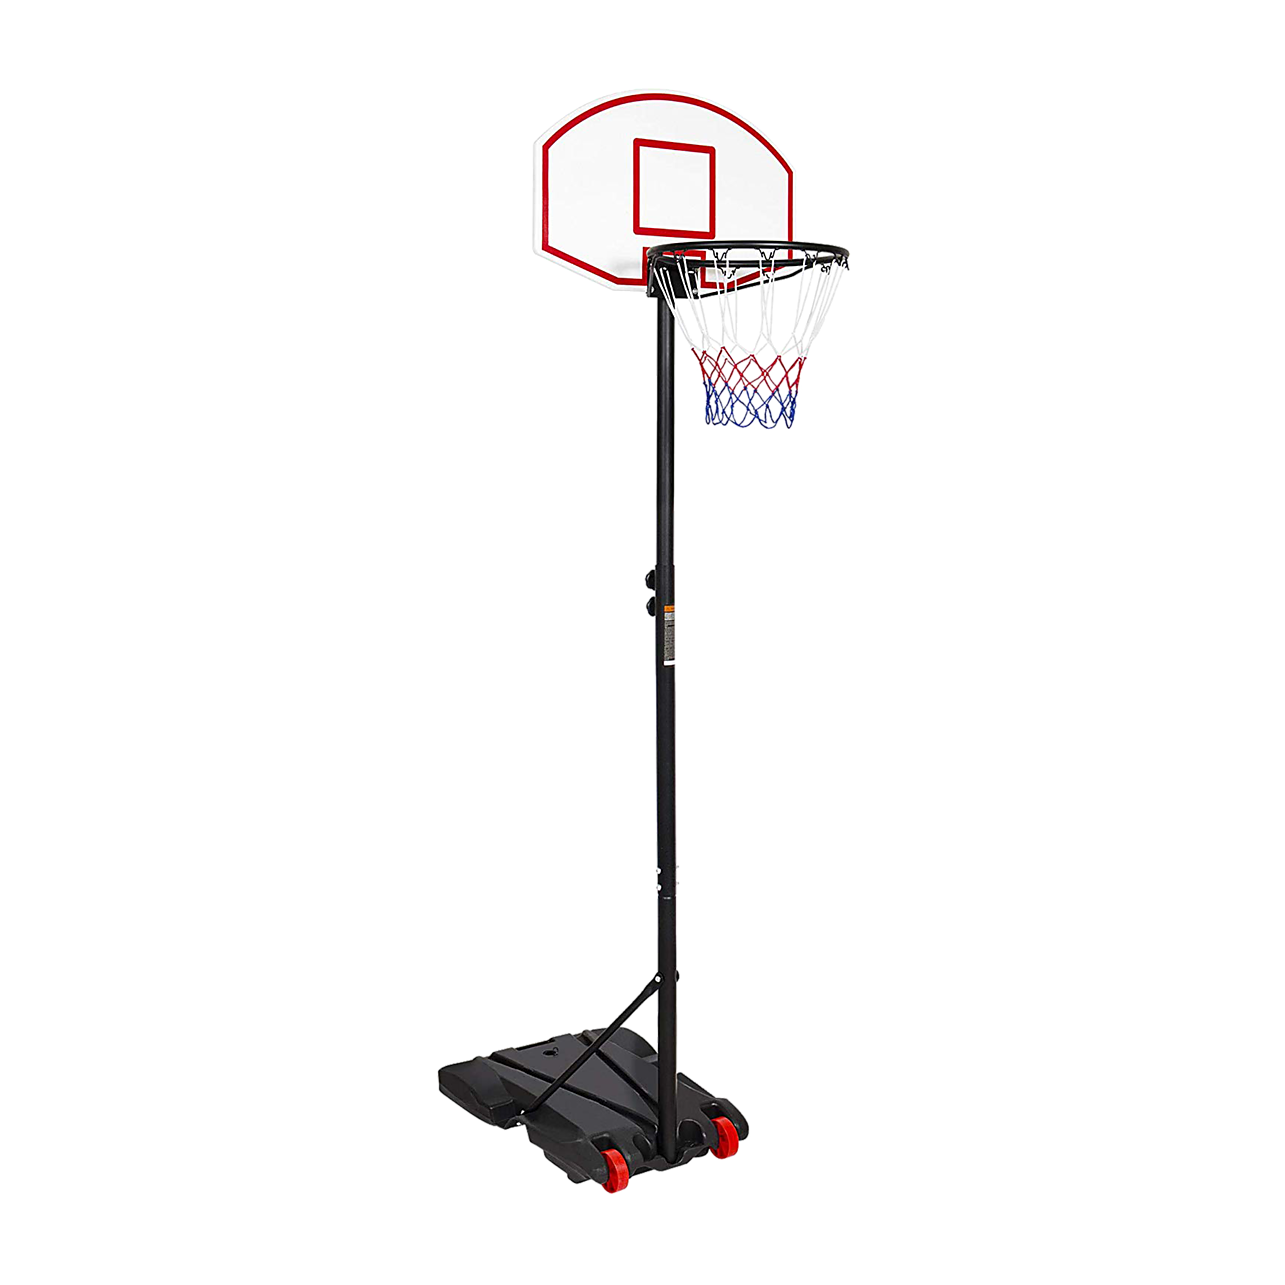 PROformance Hoops PROview Commercial Hoops | San Antonio Installation –  River City Play Systems